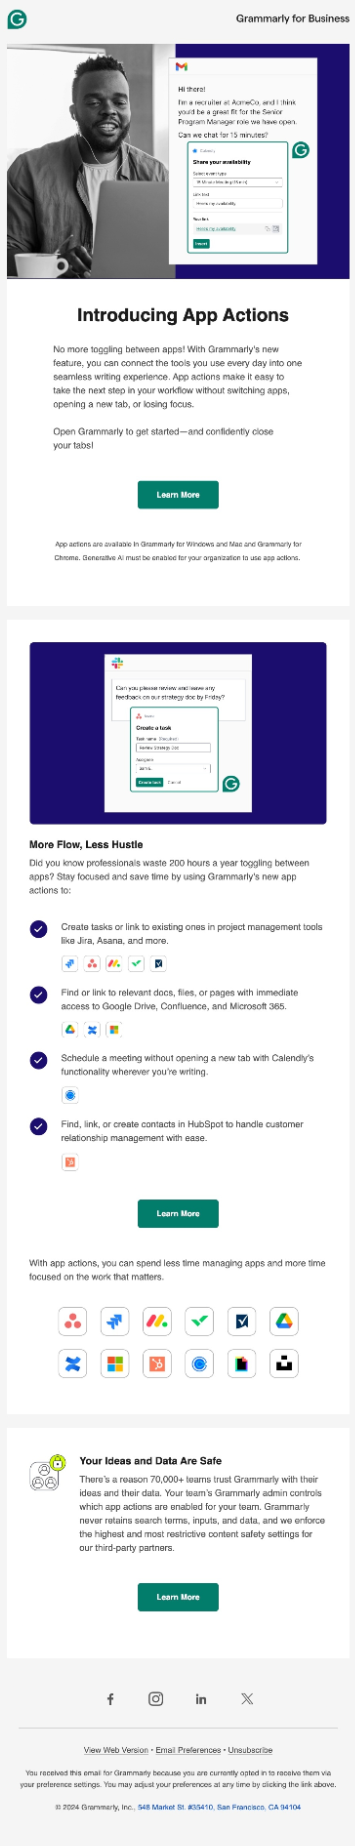 New Feature Announcement Emails: Screenshot of Grammarly's email talking about their latest feature